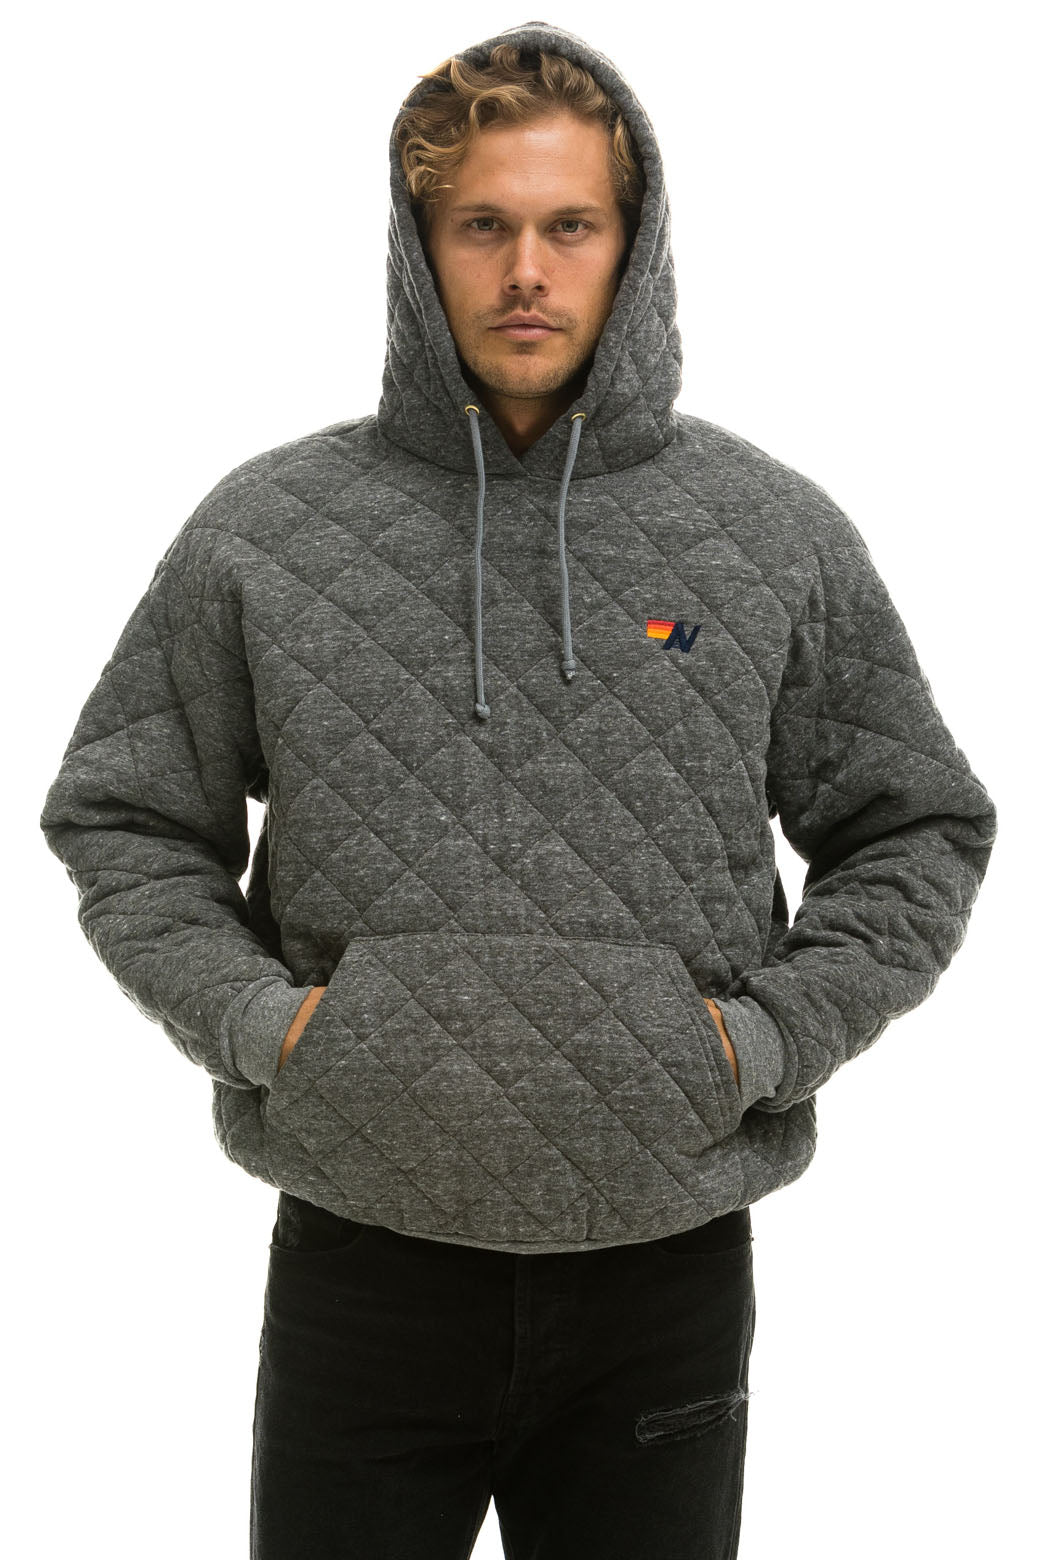 QUILTED RELAXED PULLOVER HOODIE - HEATHER GREY Hoodie Aviator Nation 